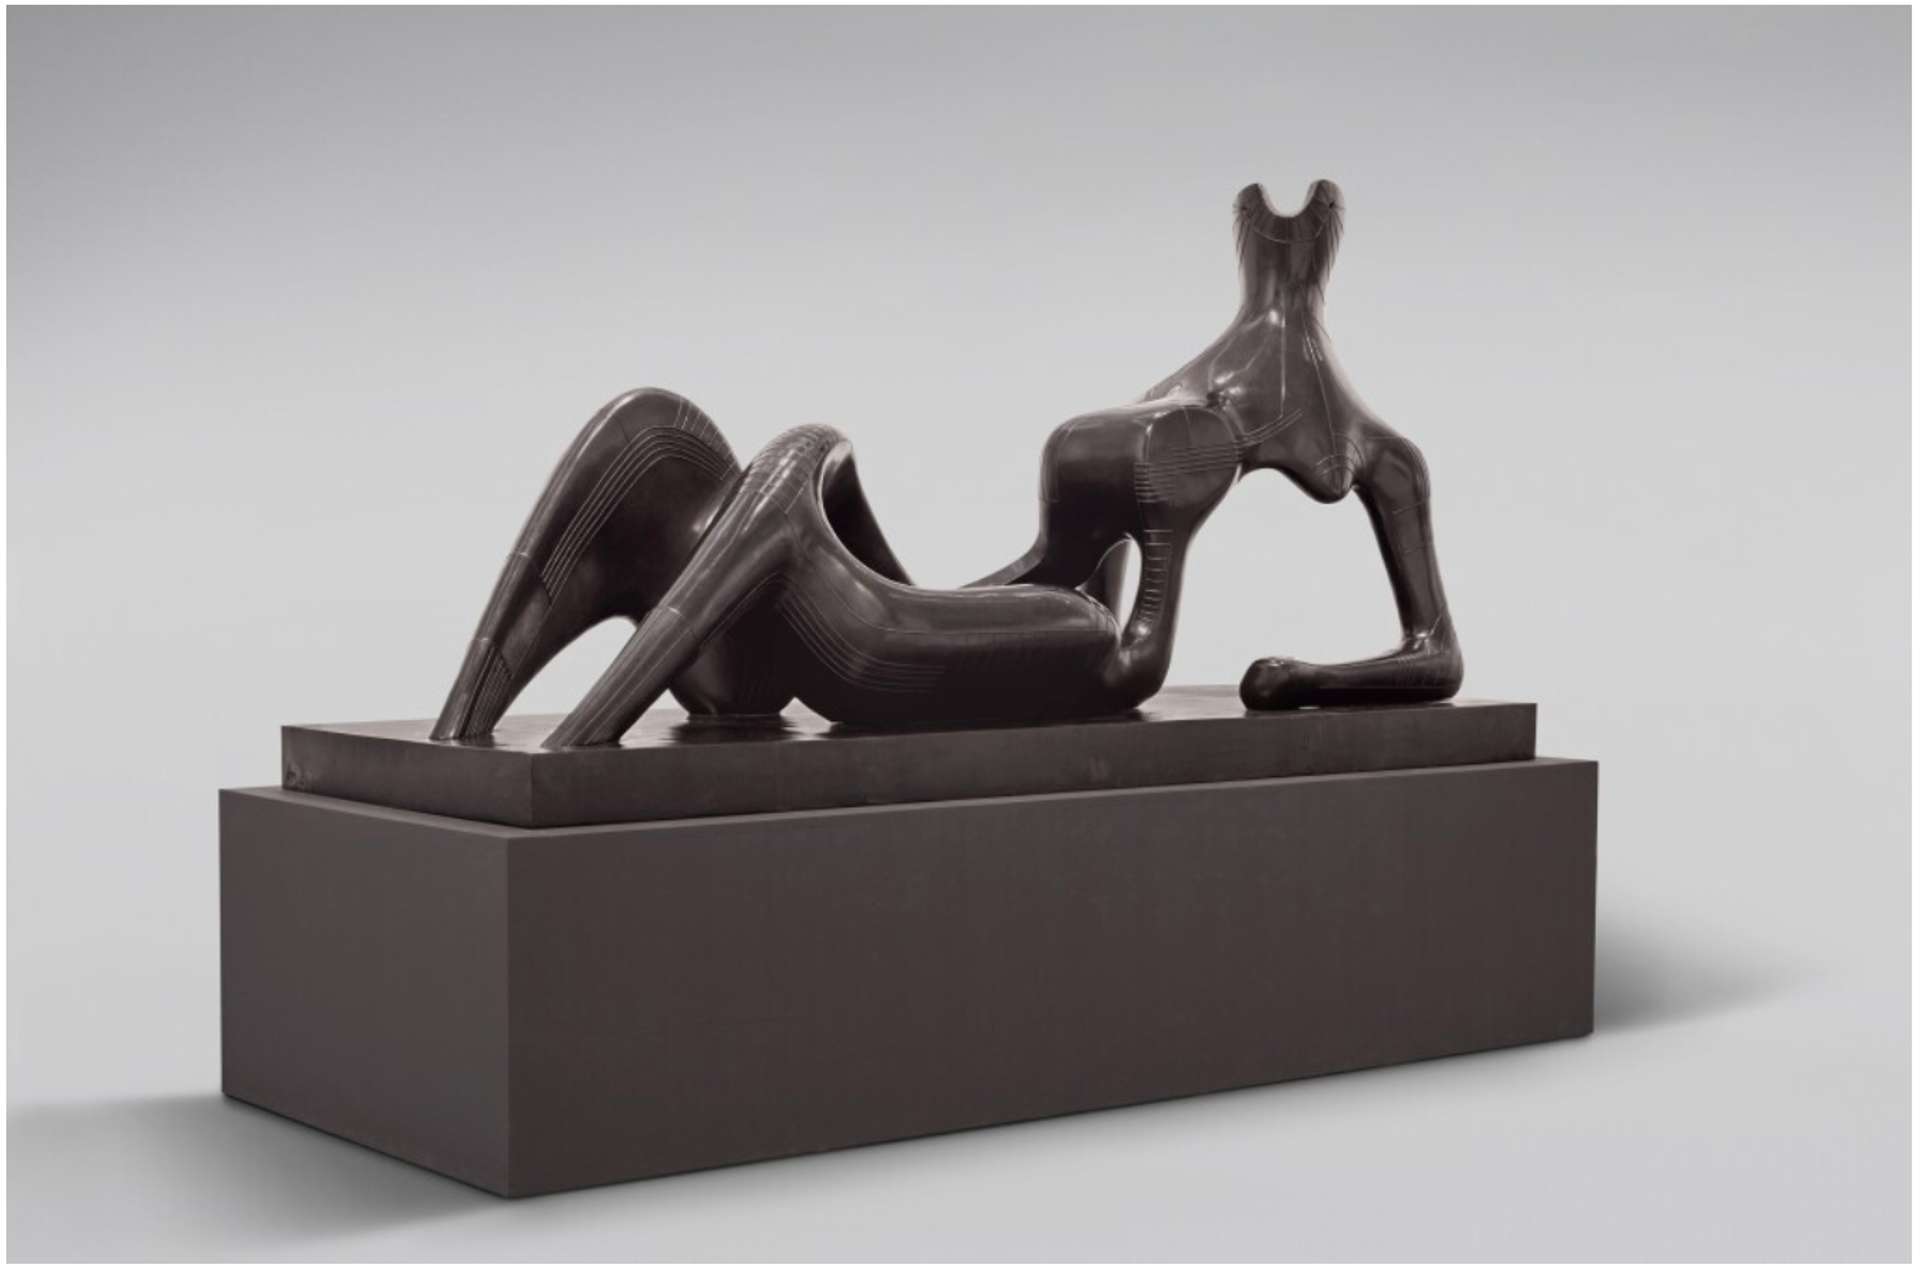 A large-scale bronze sculpture of a biomorphic reclining figure. The sculpture is positioned on a plinth, elevated on a raised platform. The figure's feet are not clearly defined, seamlessly merging into the plinth. The figure rests on a bent elbow, creating a substantial void between the elbow and the upper body representation. The sculpture skillfully balances mass and empty space.